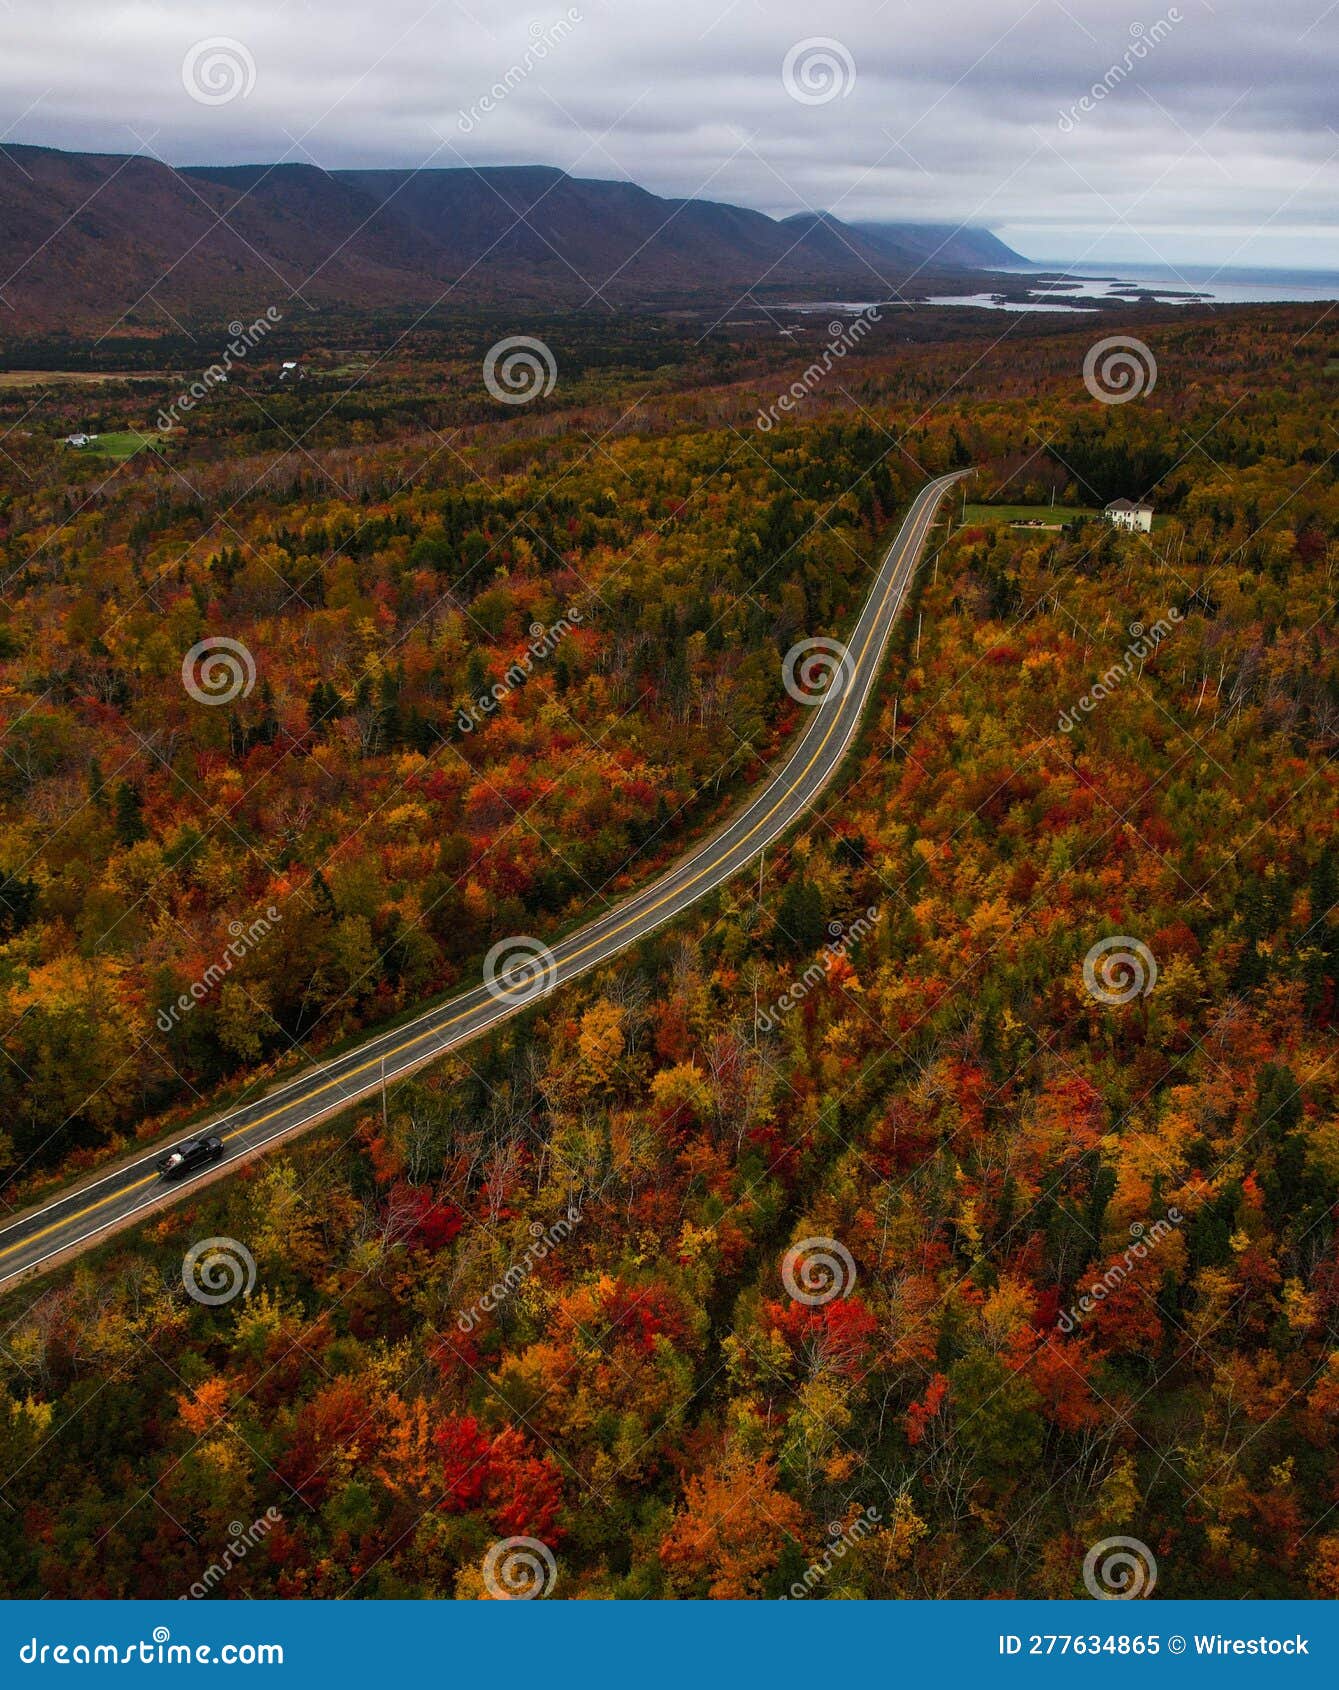 Aerial View Of The Fall Colors Of The Cabot Trail In Cape Breton Nova Scotia Canada Stock